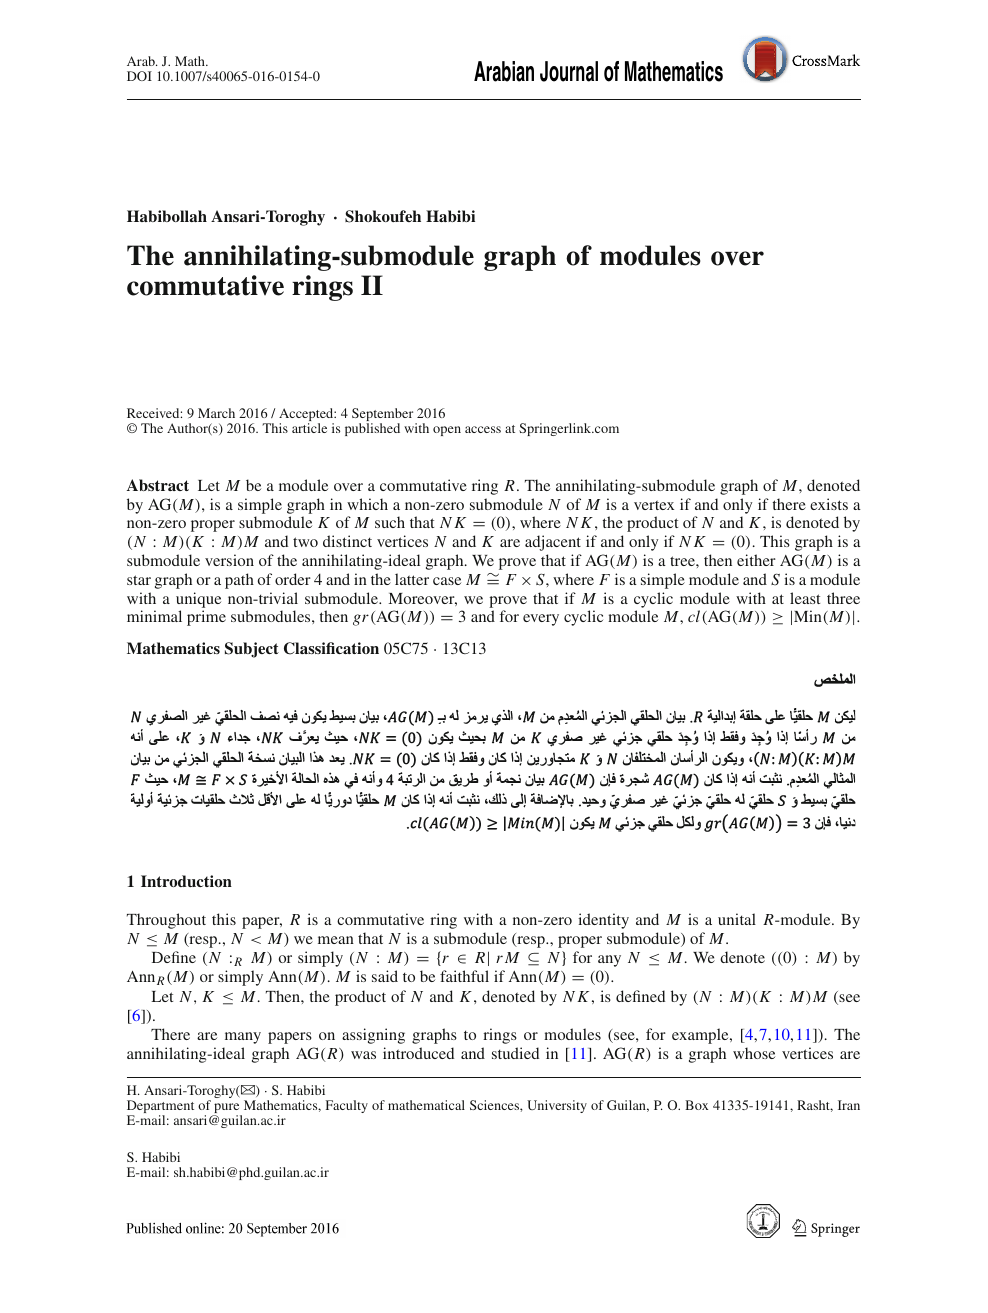 The Annihilating Submodule Graph Of Modules Over Commutative Rings Ii Topic Of Research Paper In Mathematics Download Scholarly Article Pdf And Read For Free On Cyberleninka Open Science Hub